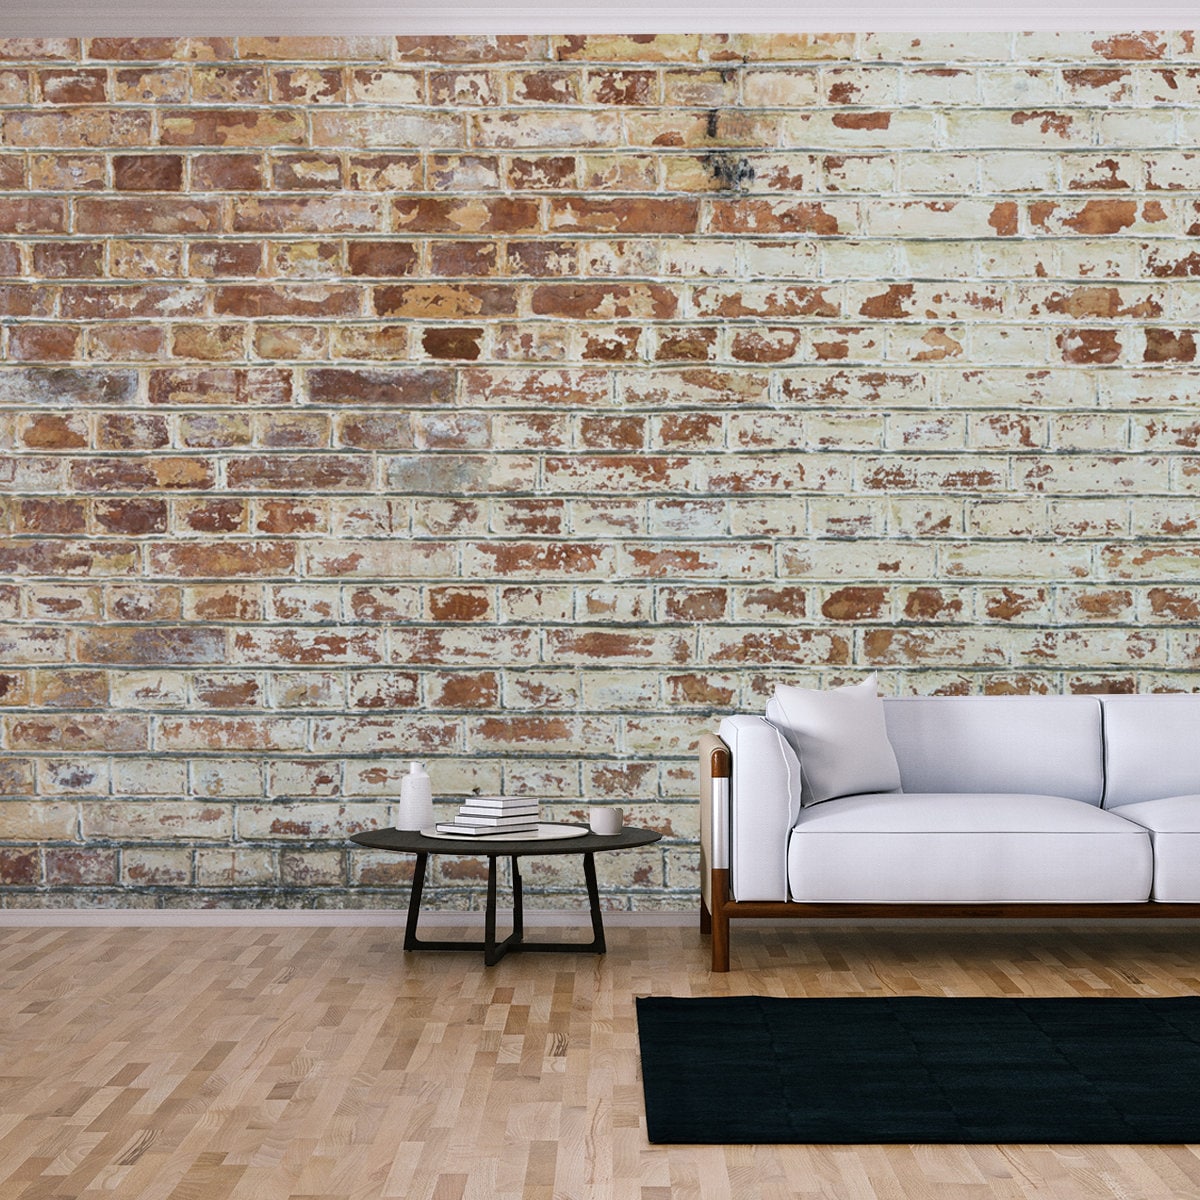 Background of Old Vintage Dirty Brick Wall with Peeling Plaster Wallpaper Living Room Mural